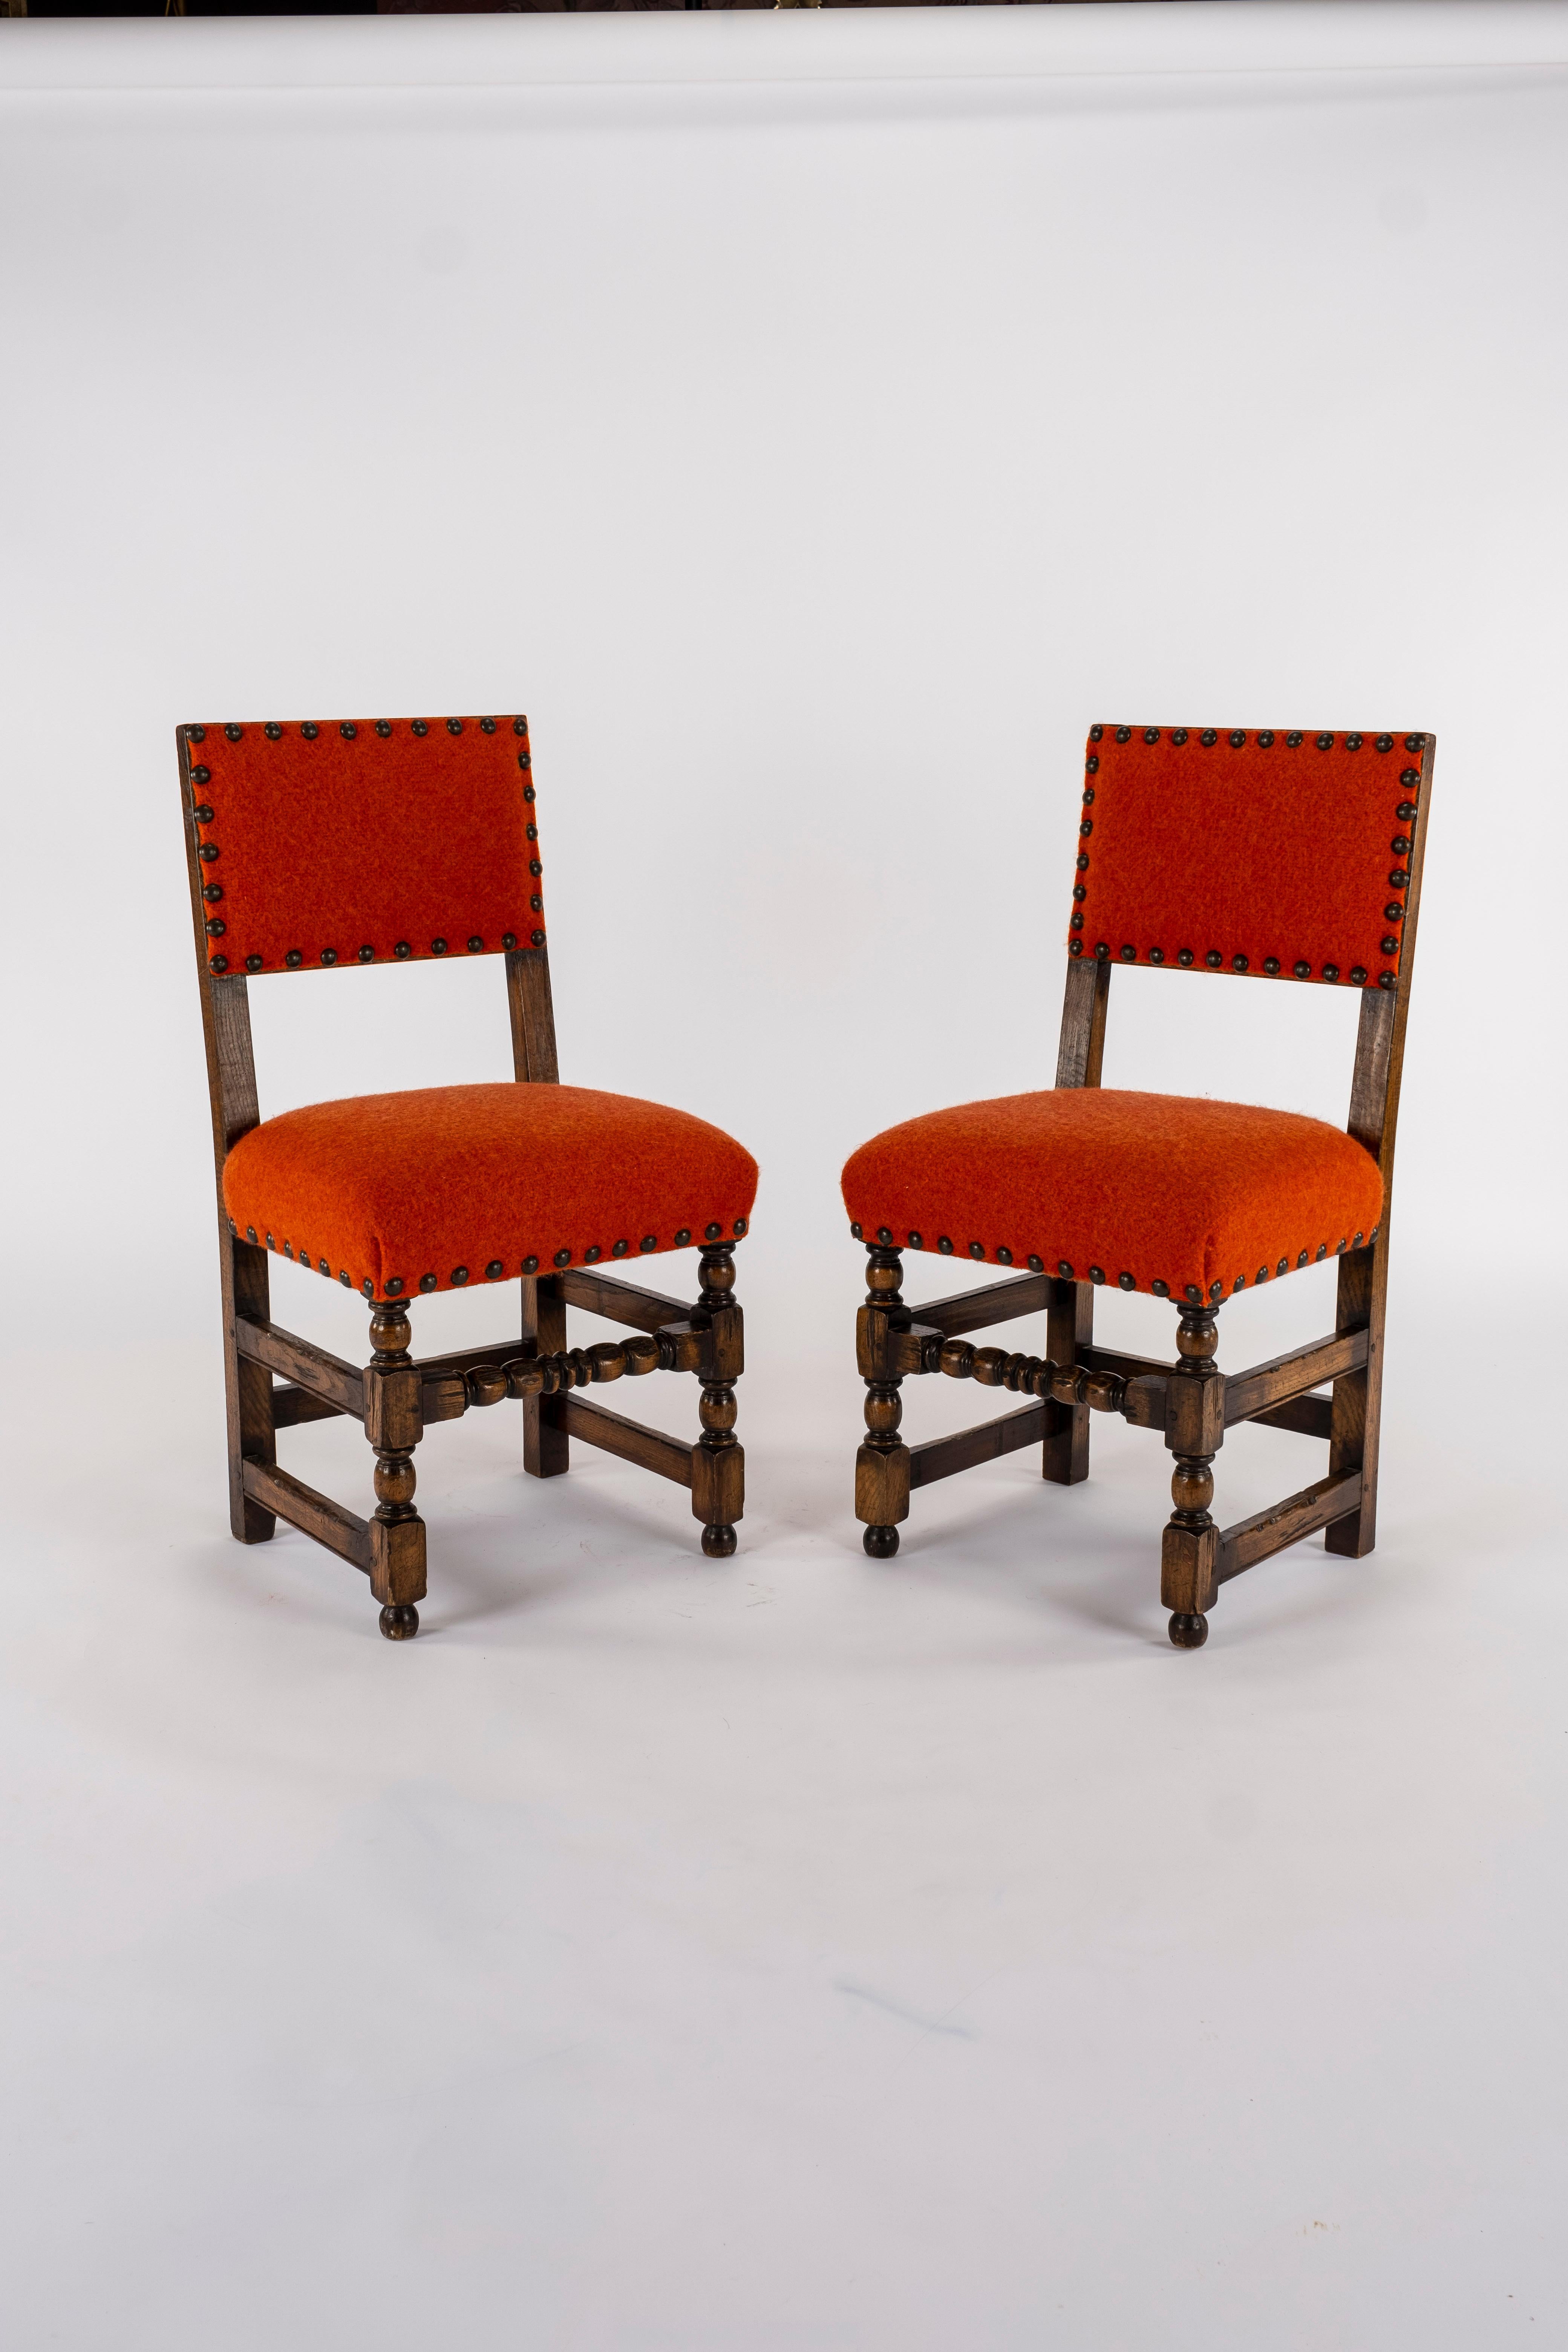 Handsome French Louis XIII style walnut chairs newly upholstered in a heavy felted orange red wool with nailhead detail.